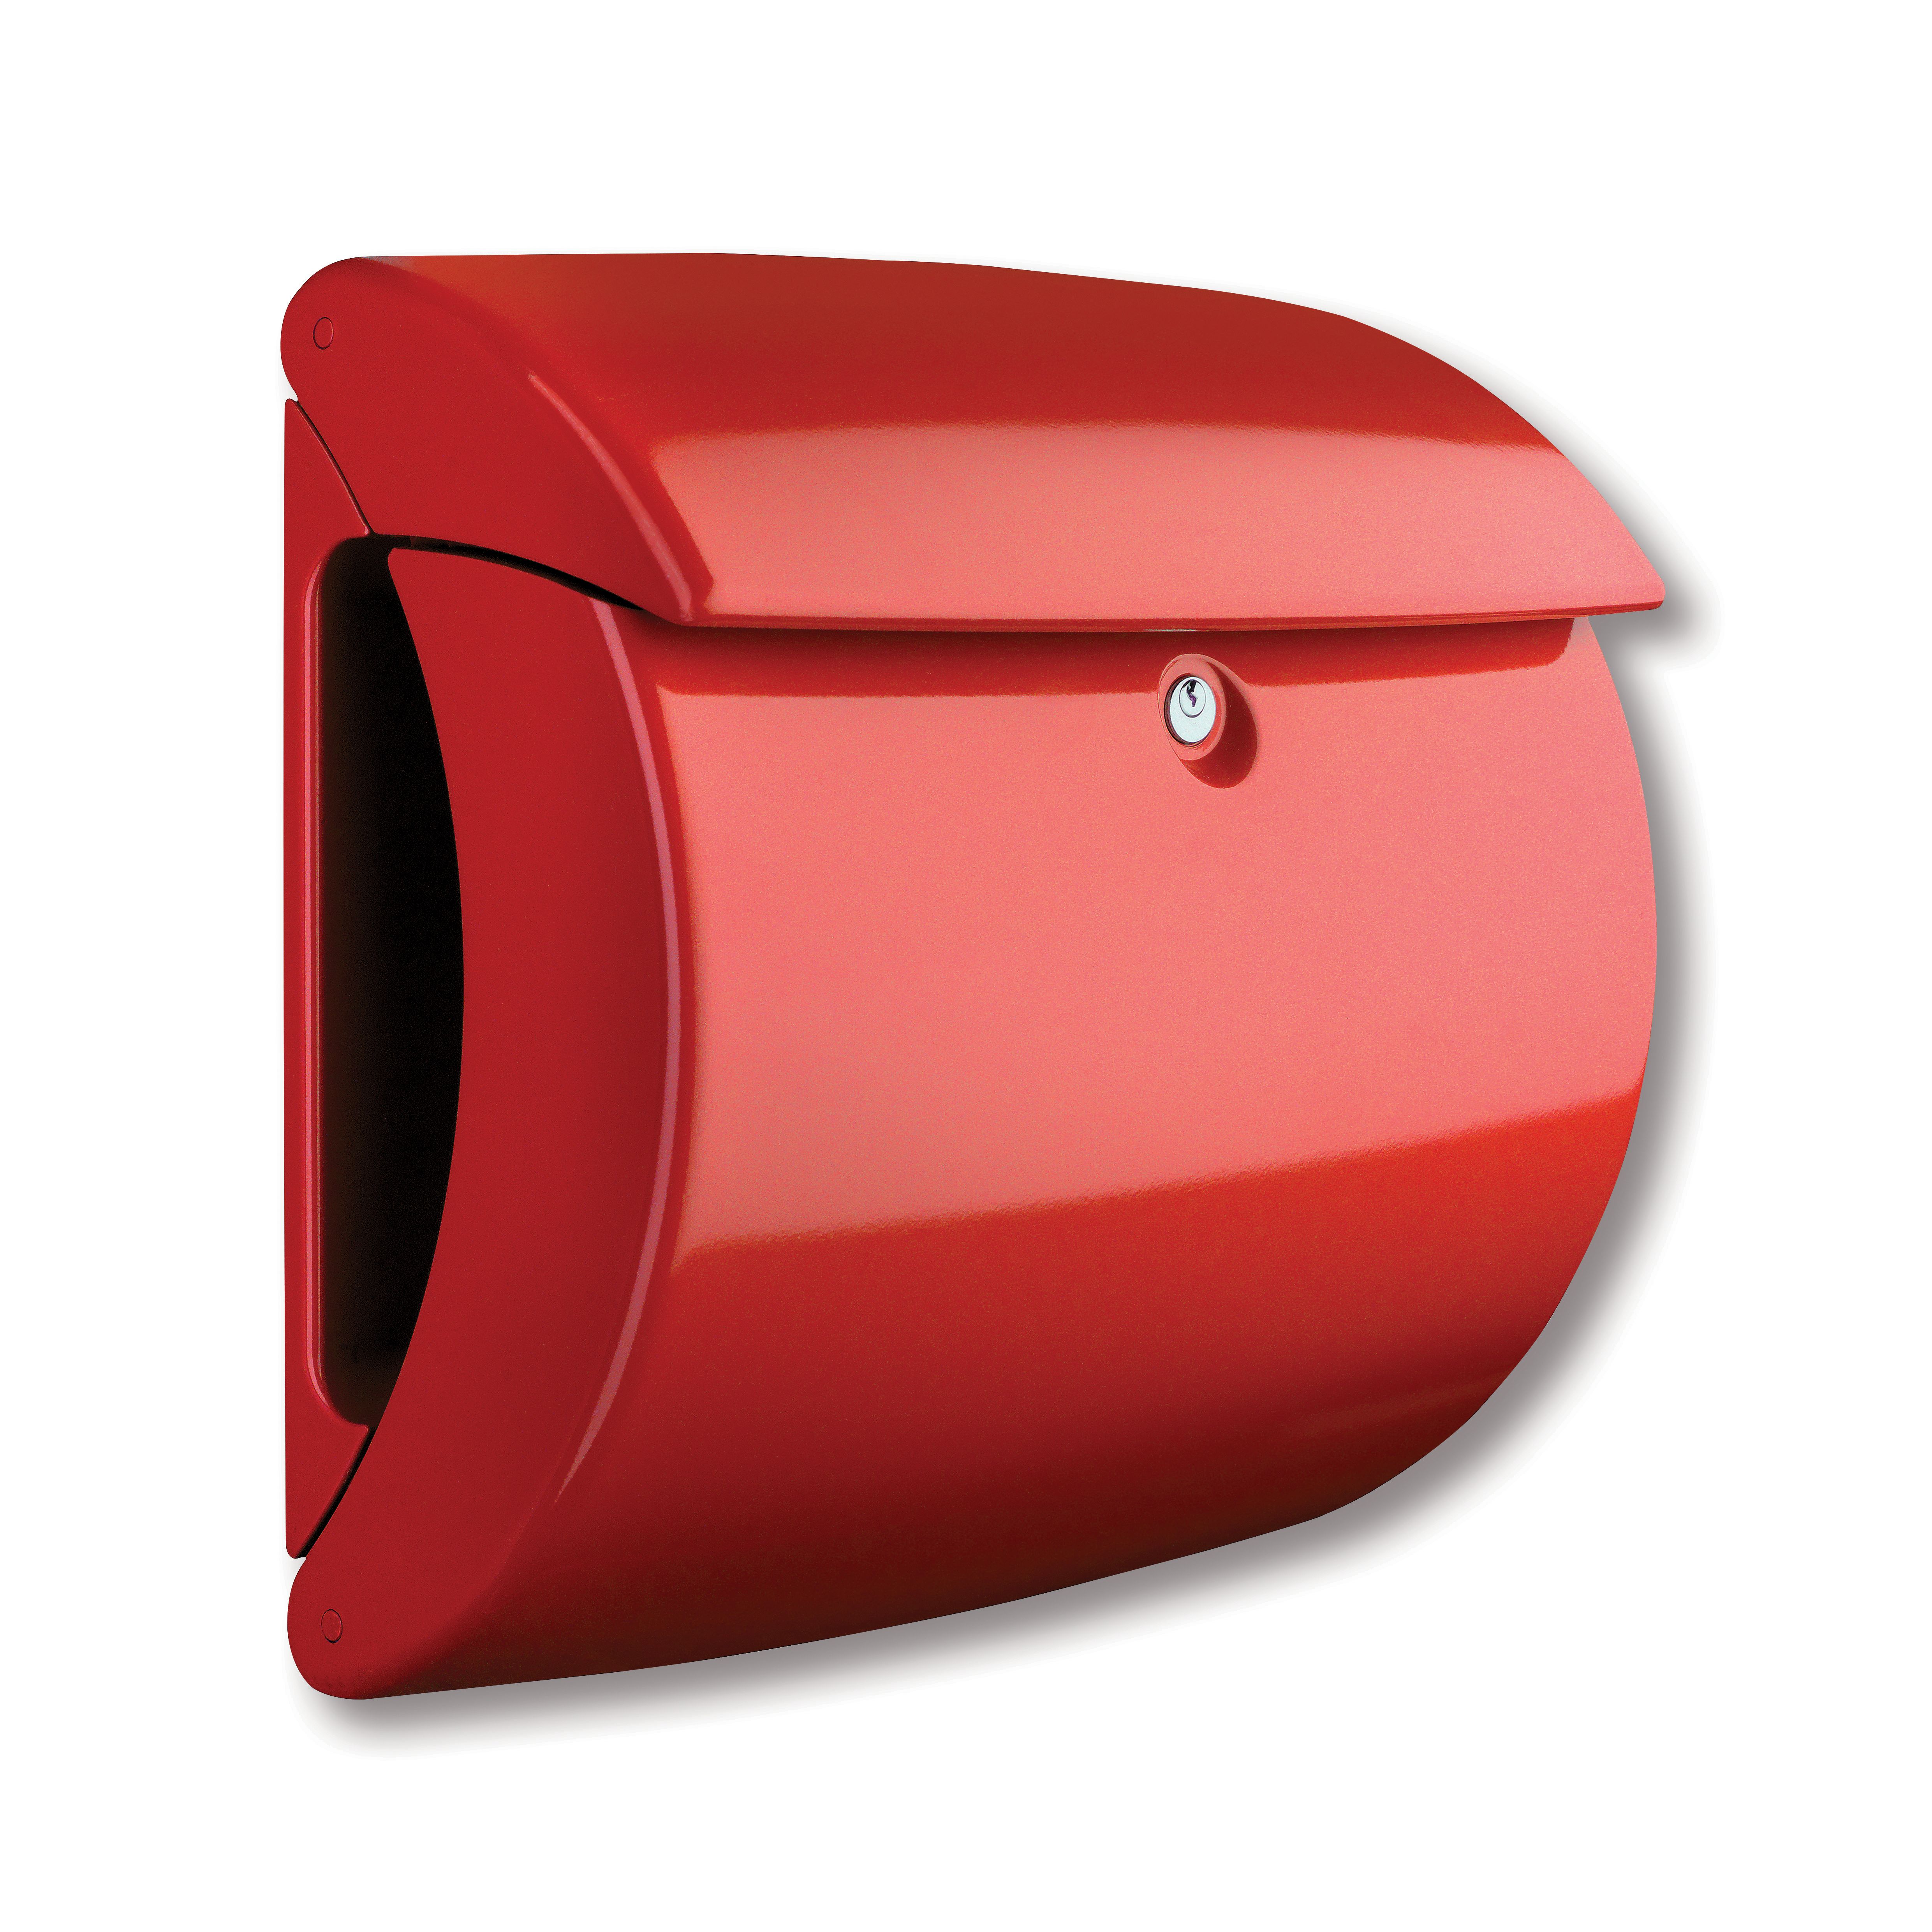 Image of Burg-Wachter Piano Post Box - Red